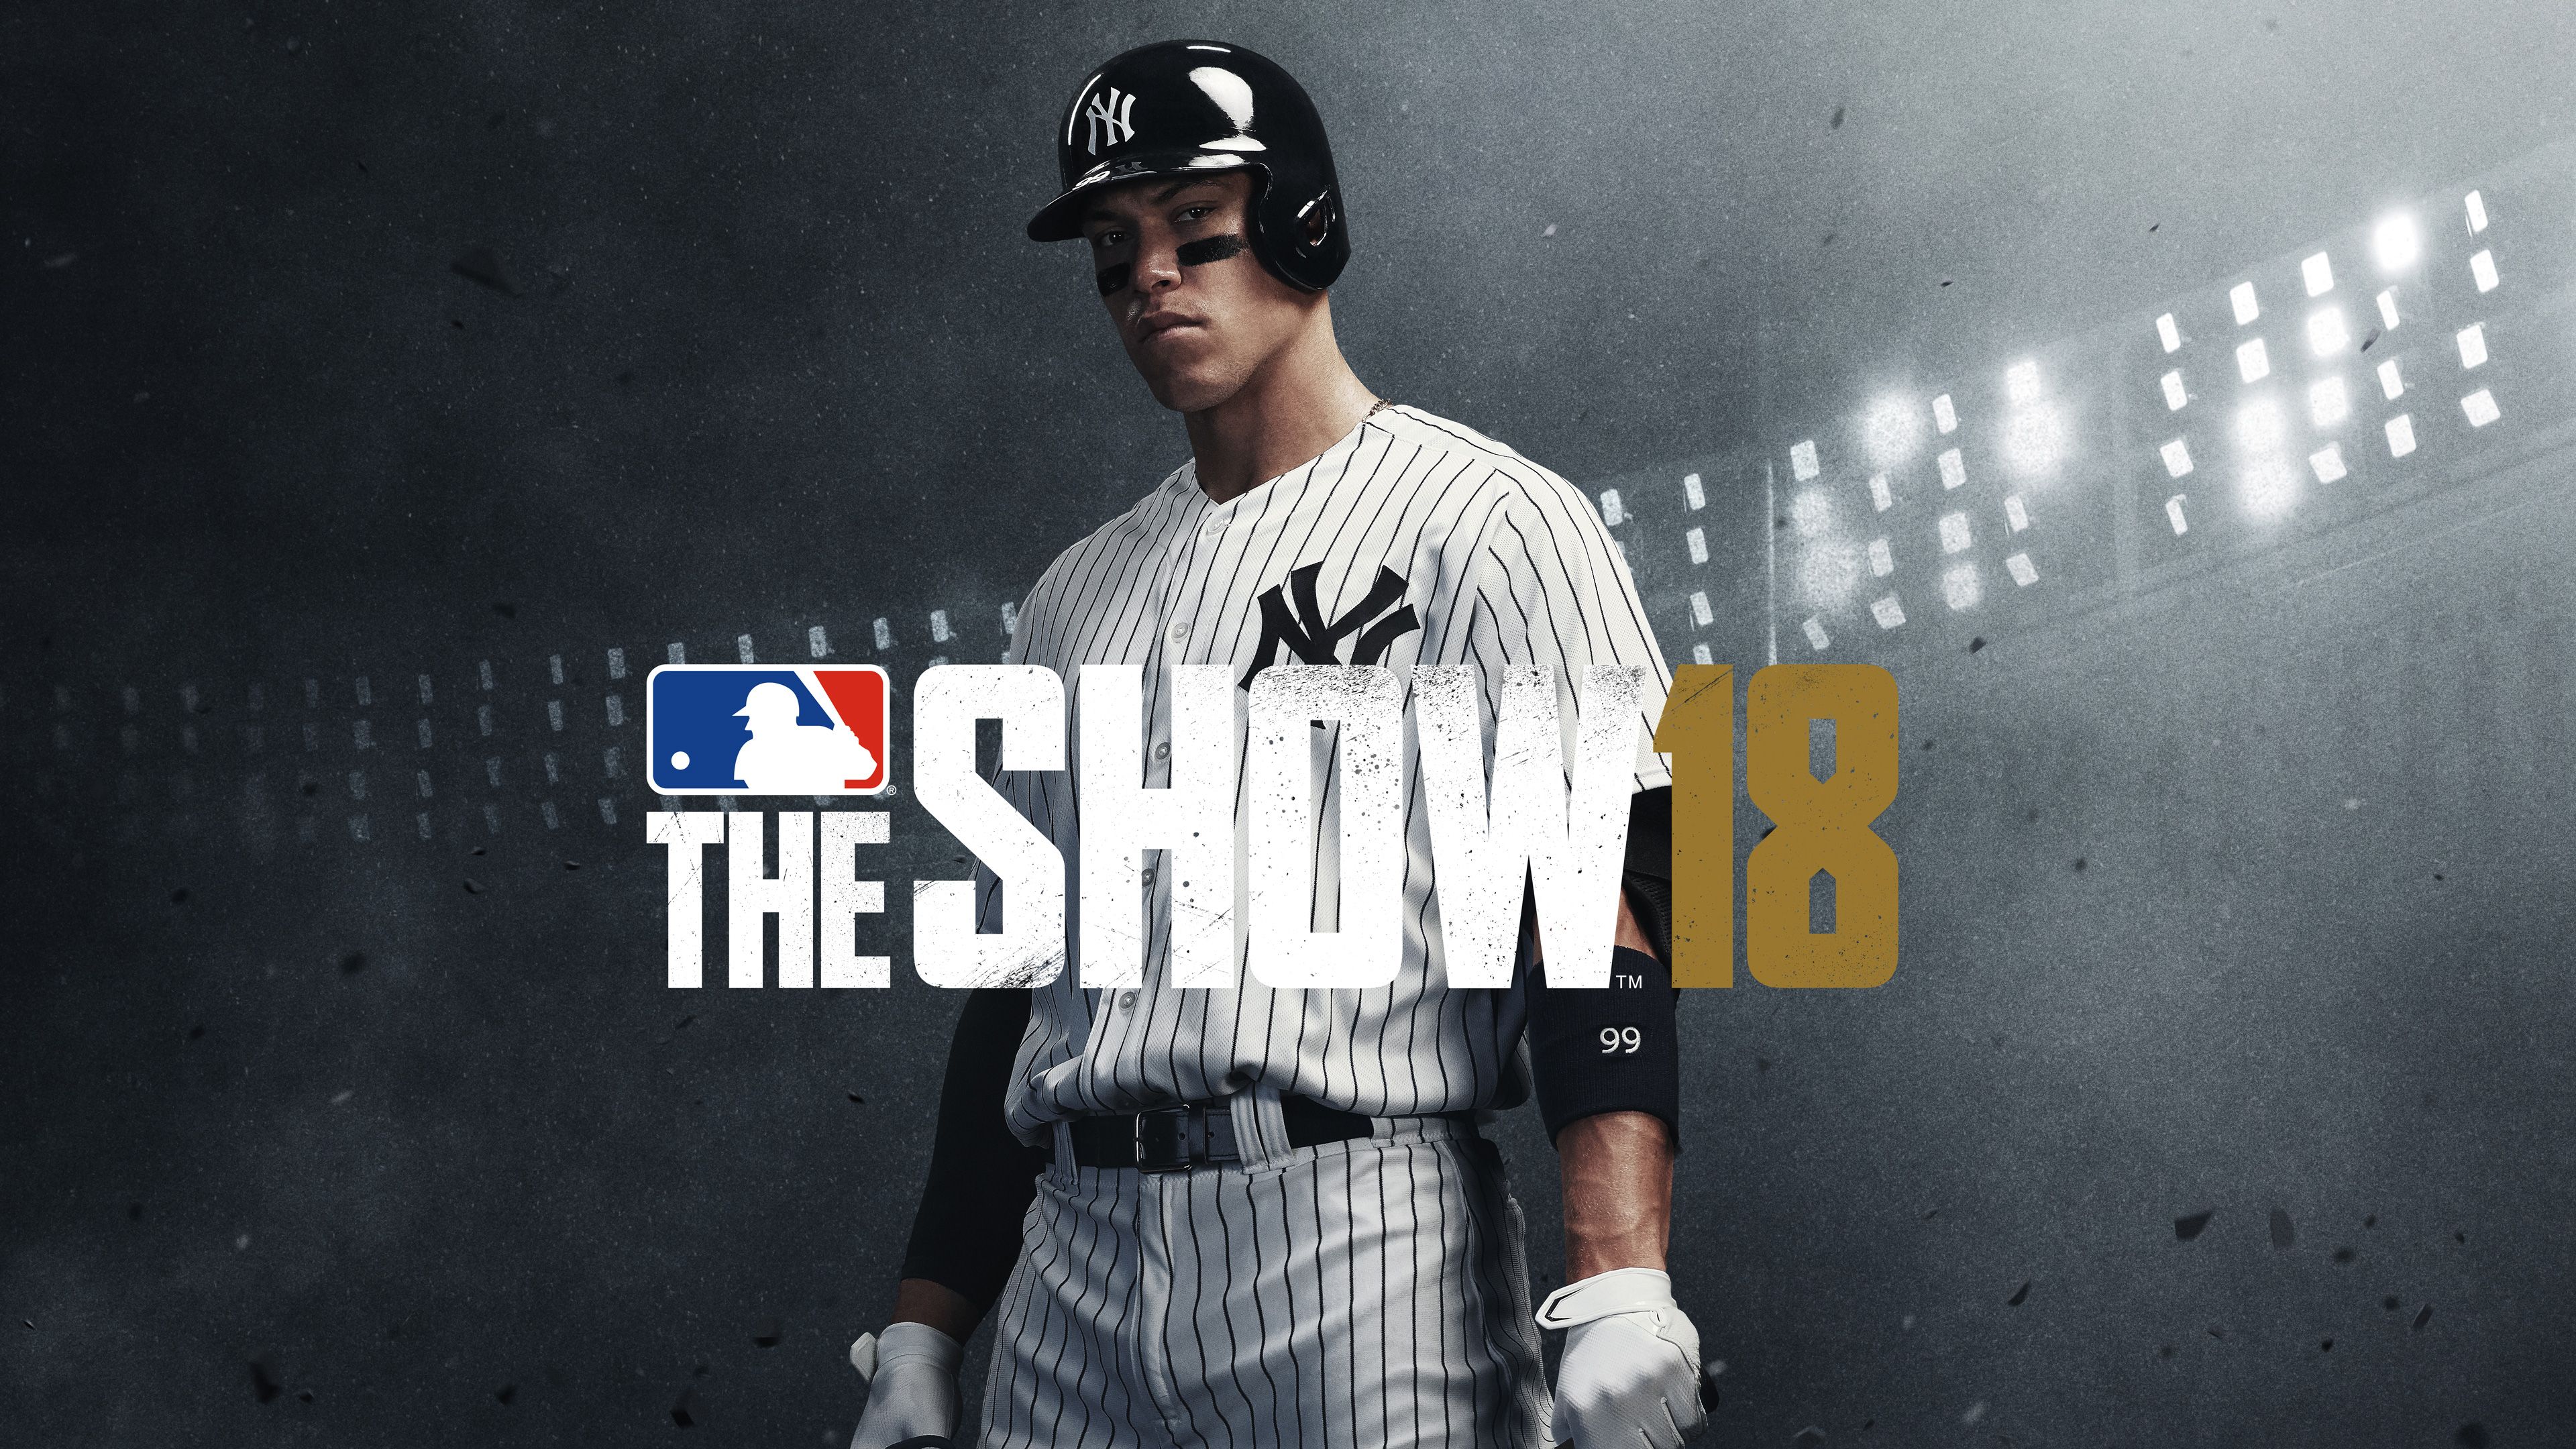 MLB The Show 18 Wallpapers - Wallpaper Cave.